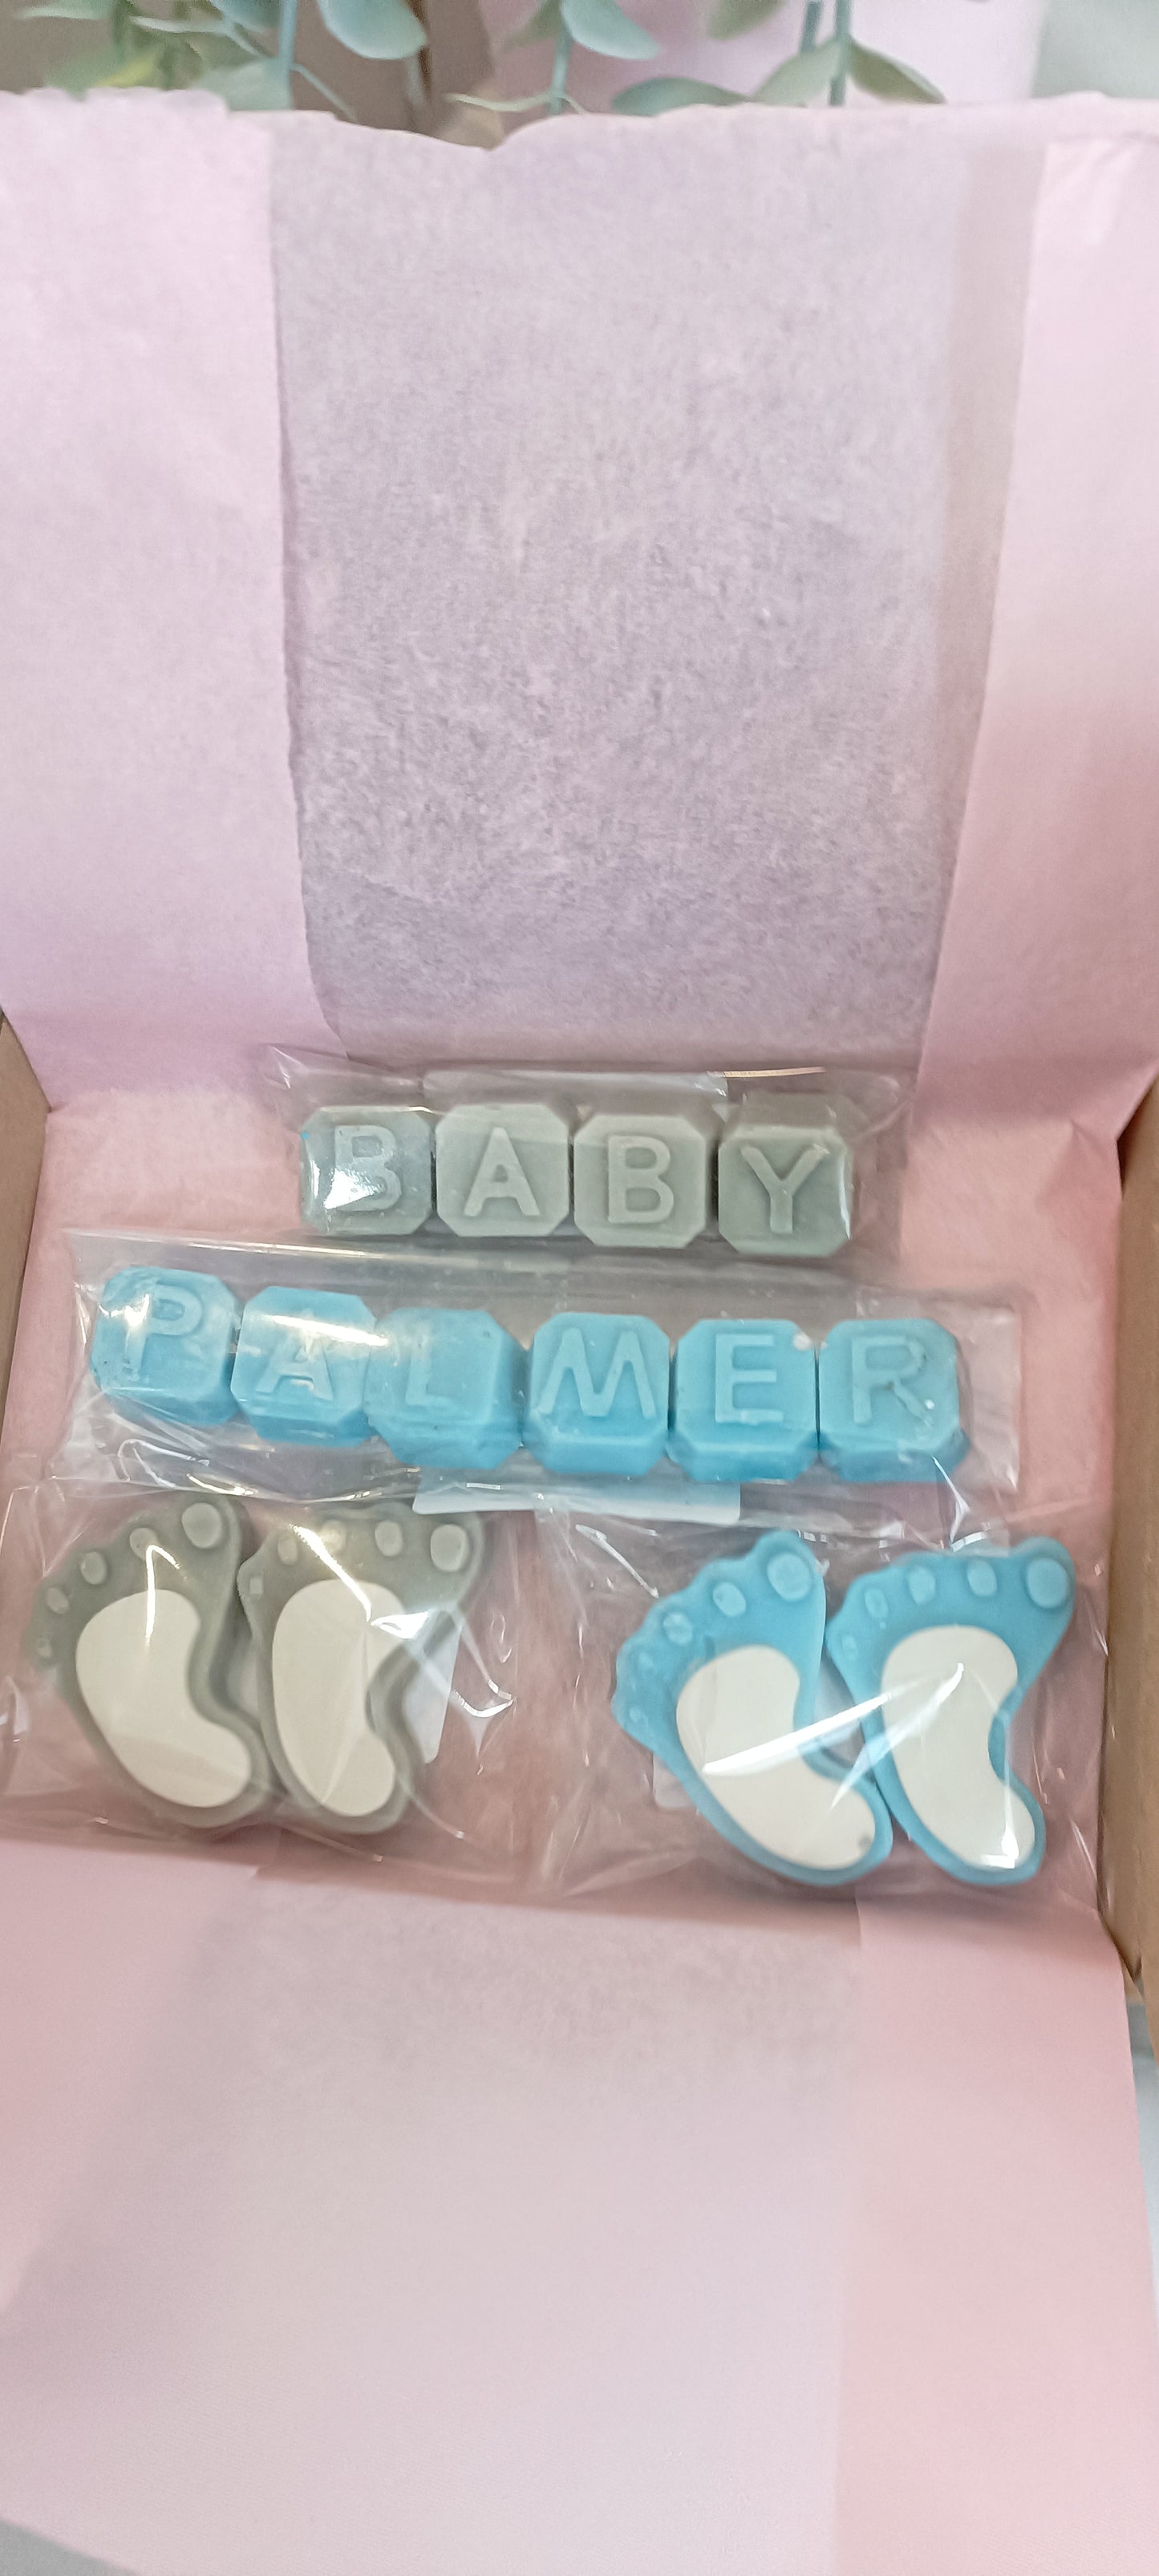 Baby personalized gift set